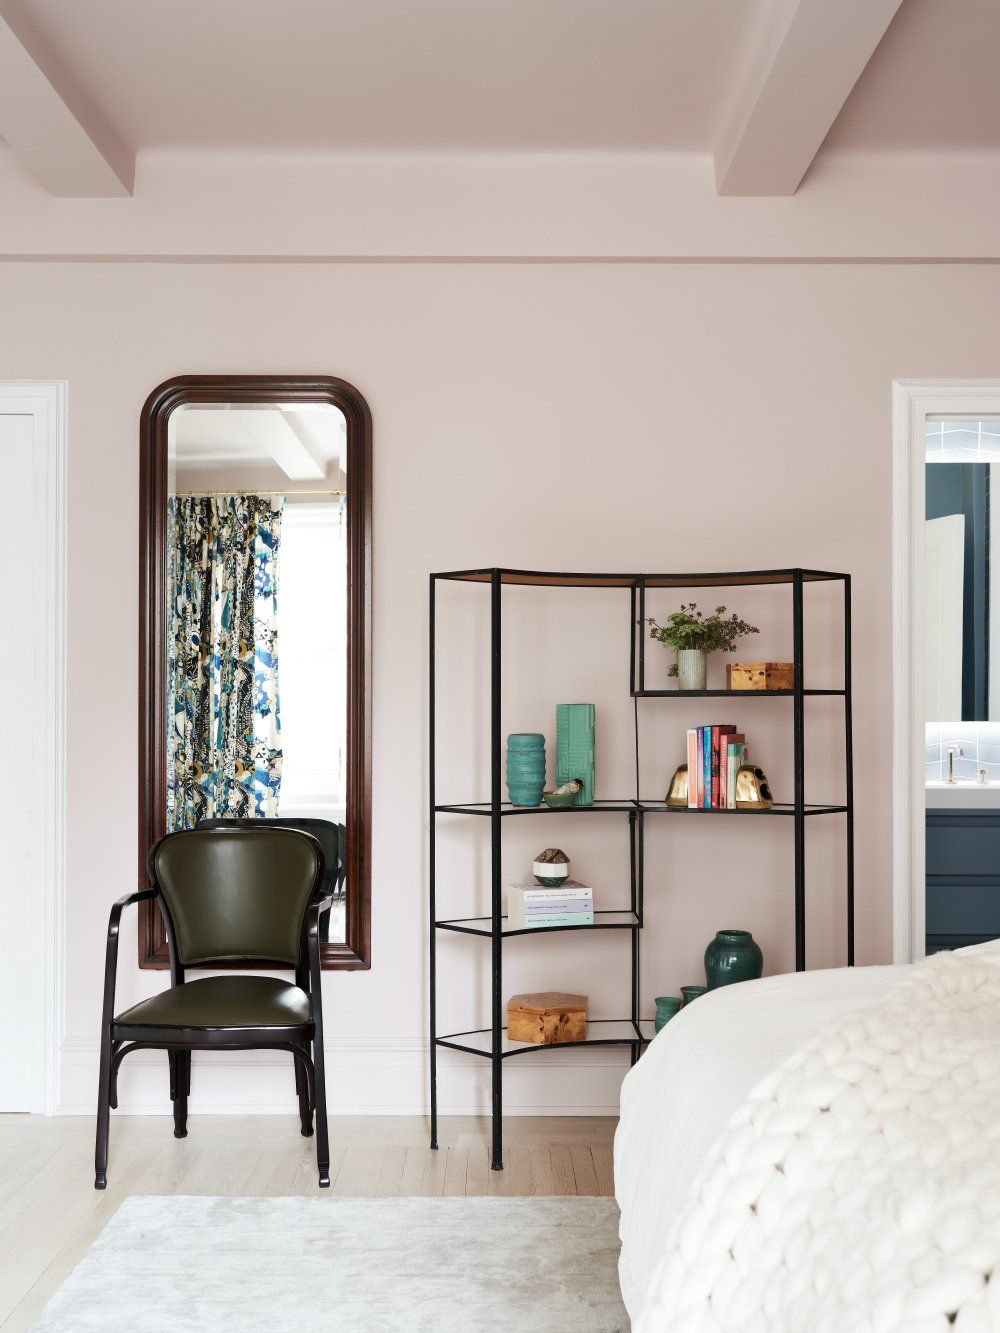 The walls and the ceiling of the bedroom have been painted in a pastel shade of pink which looks very trendy